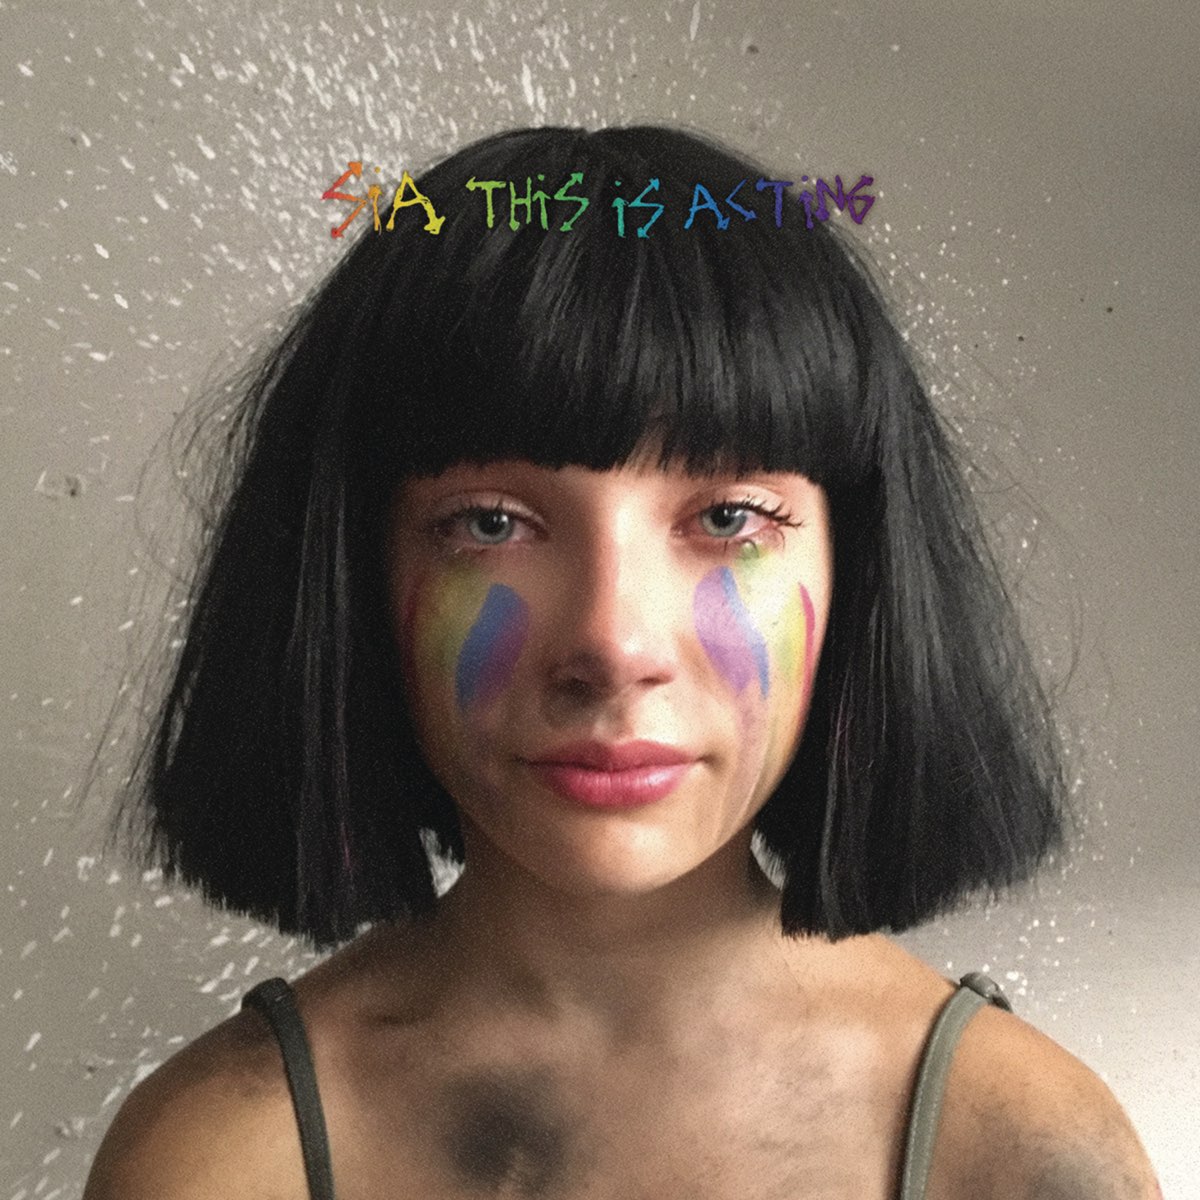 Sia Fist Fighting a Sandstorm cover artwork